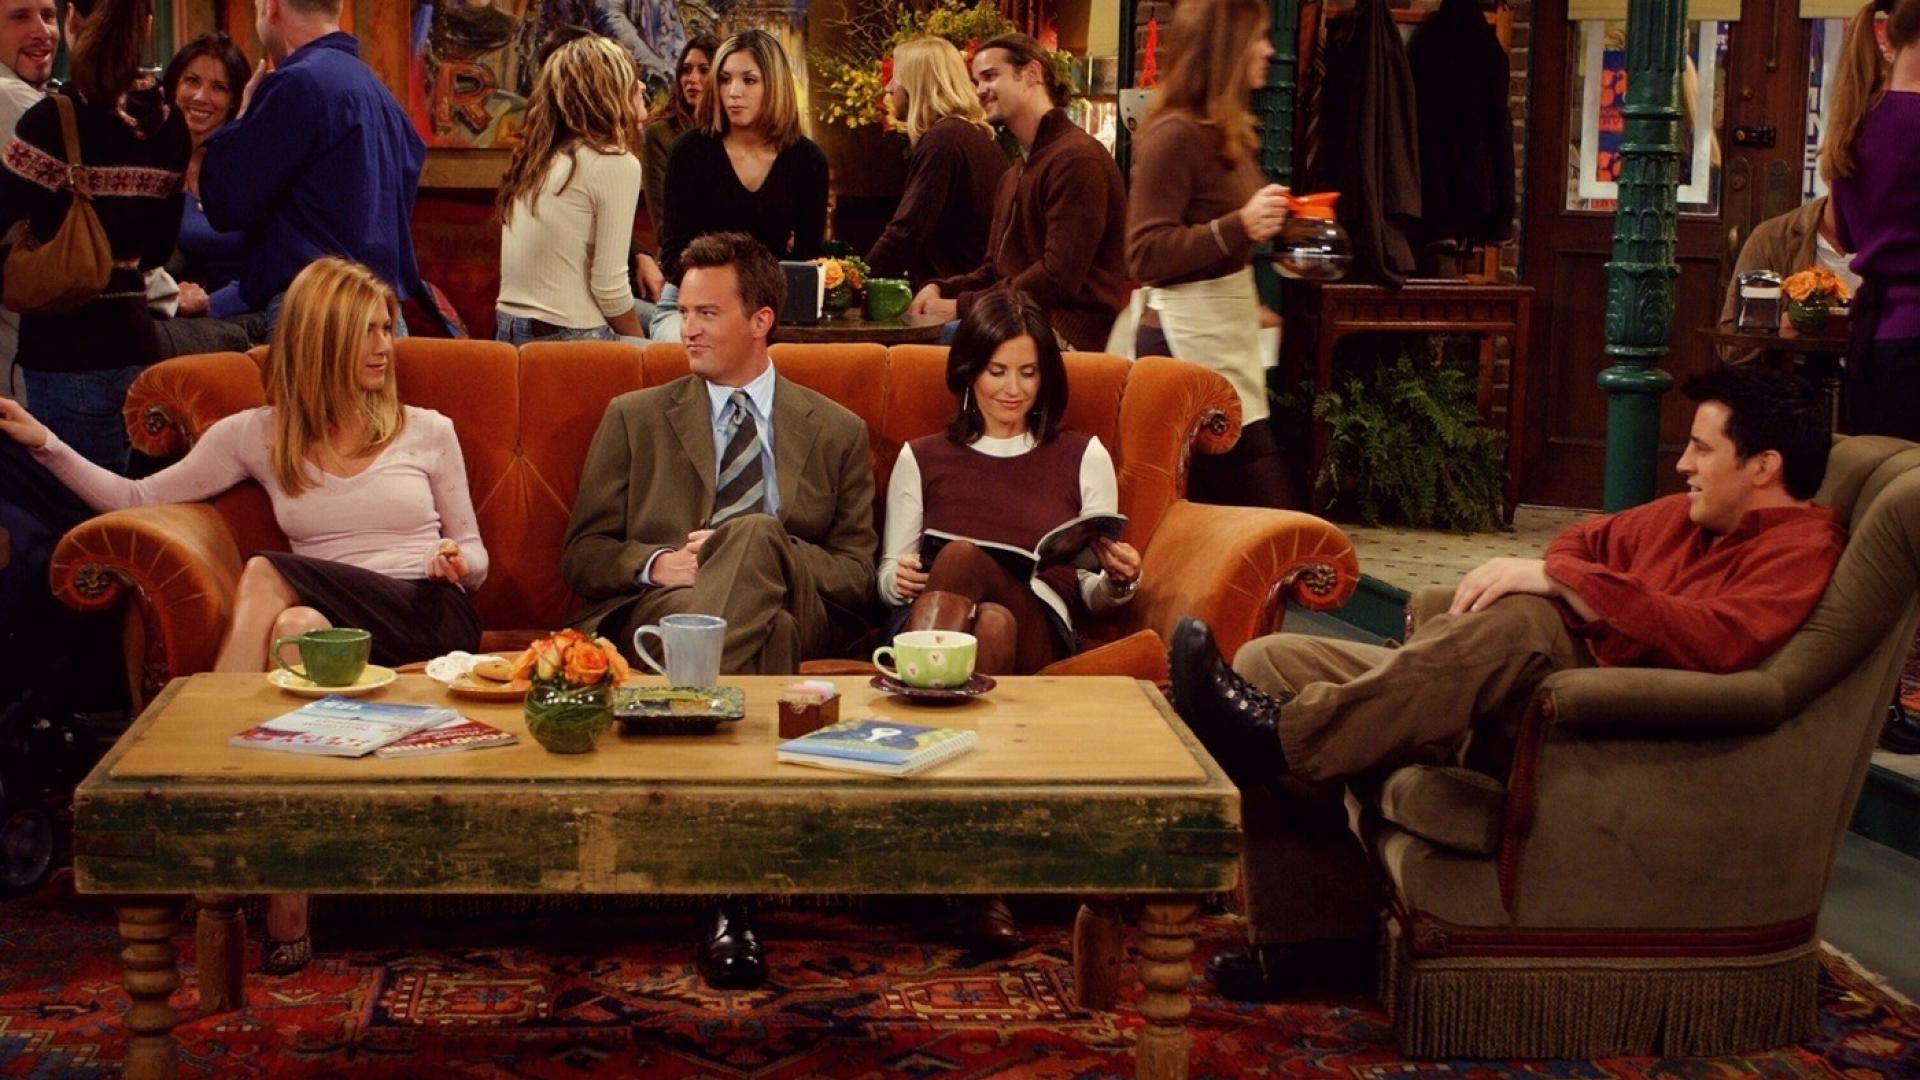 Free download Friends tv series shows joey tribbiani sofa wallpaper 8187 [1920x1080] for your Desktop, Mobile & Tablet. Explore Friends TV Show Wallpaper. Funny TV Shows Wallpaper, Friends Wallpaper